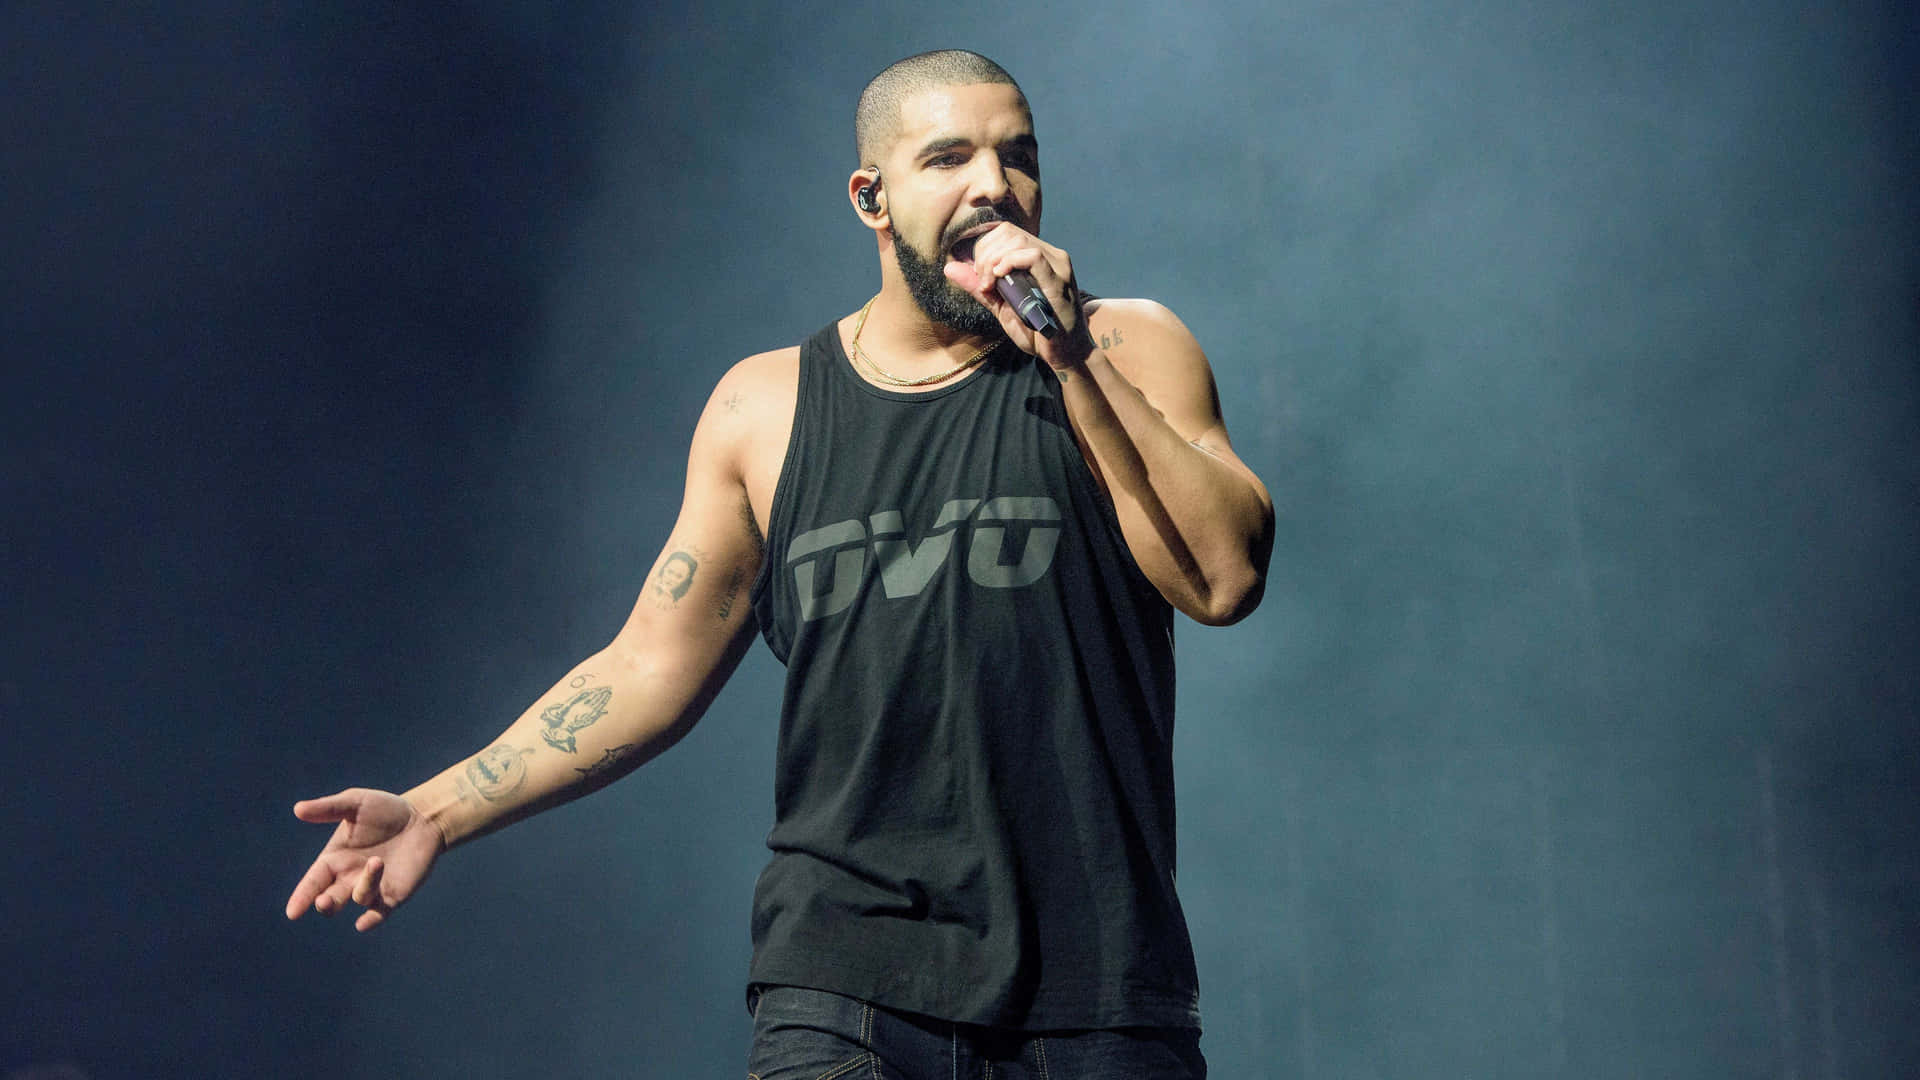 Canadian rapper Drake performs on stage